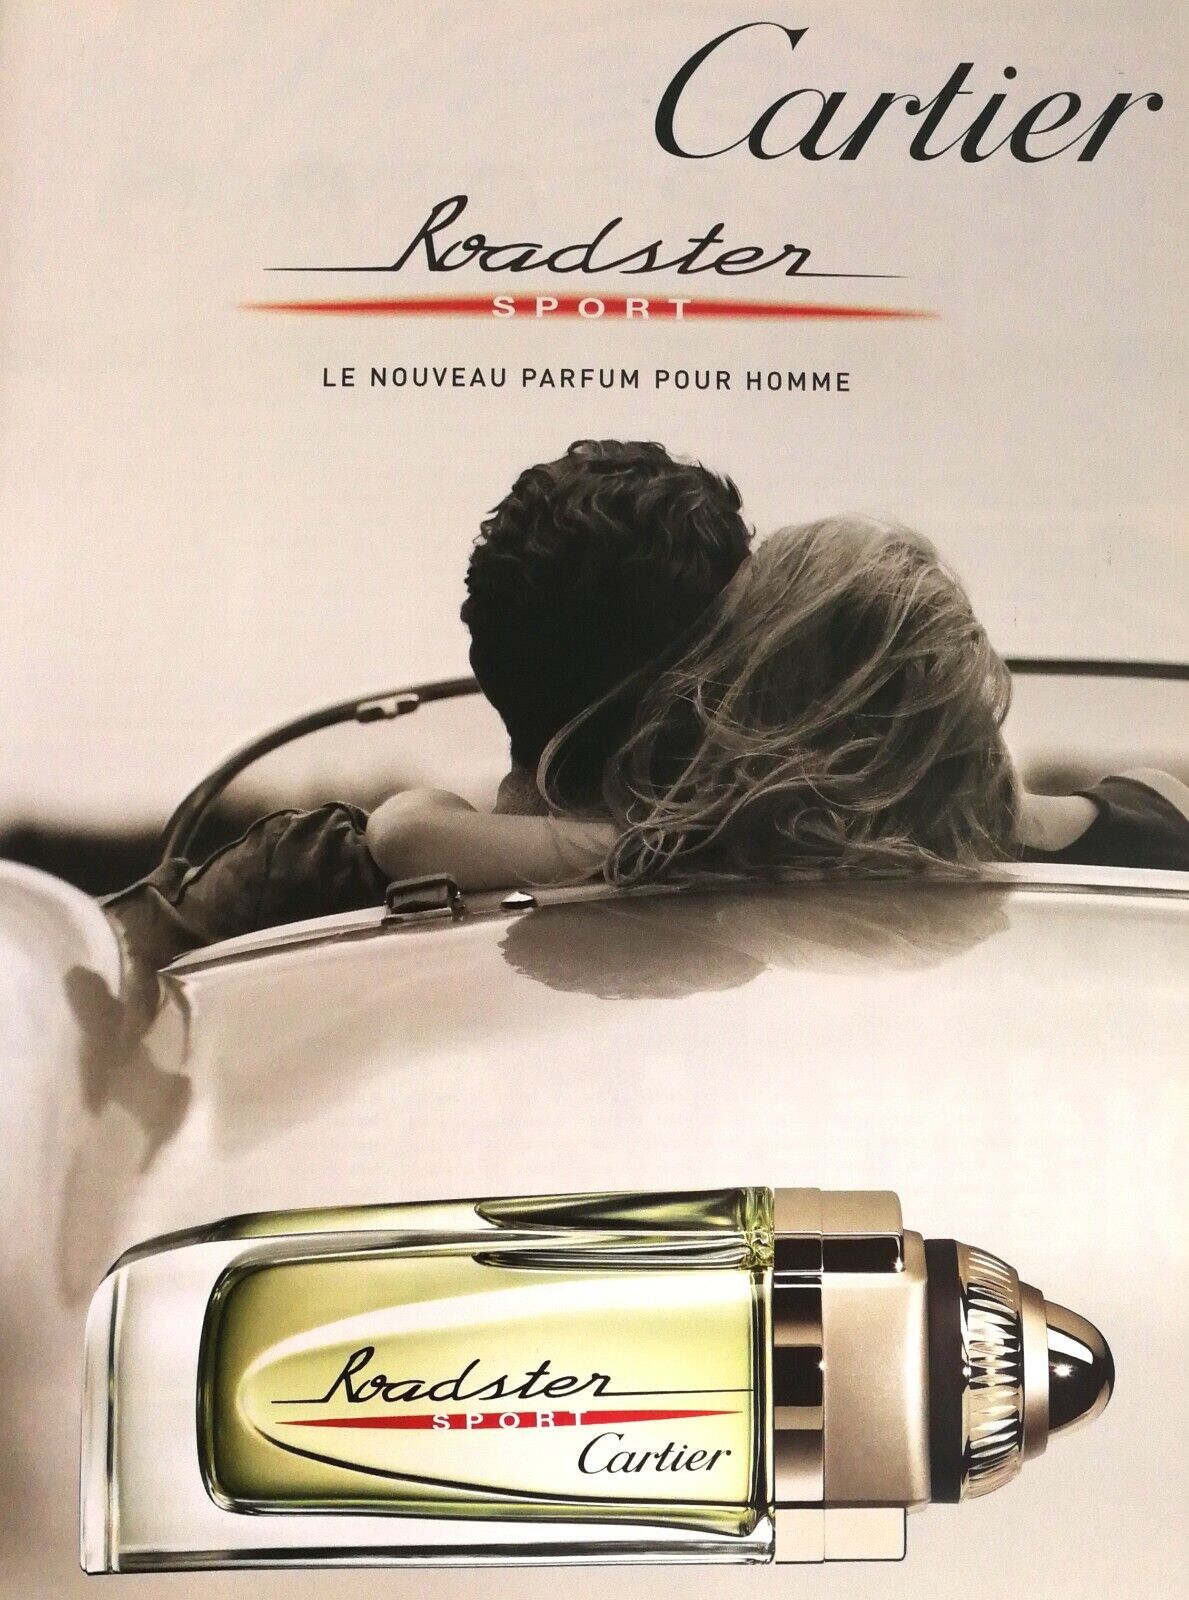 2010 Cartier Roadster Sport Collection Cologne Spanish Colombia Ad Rare